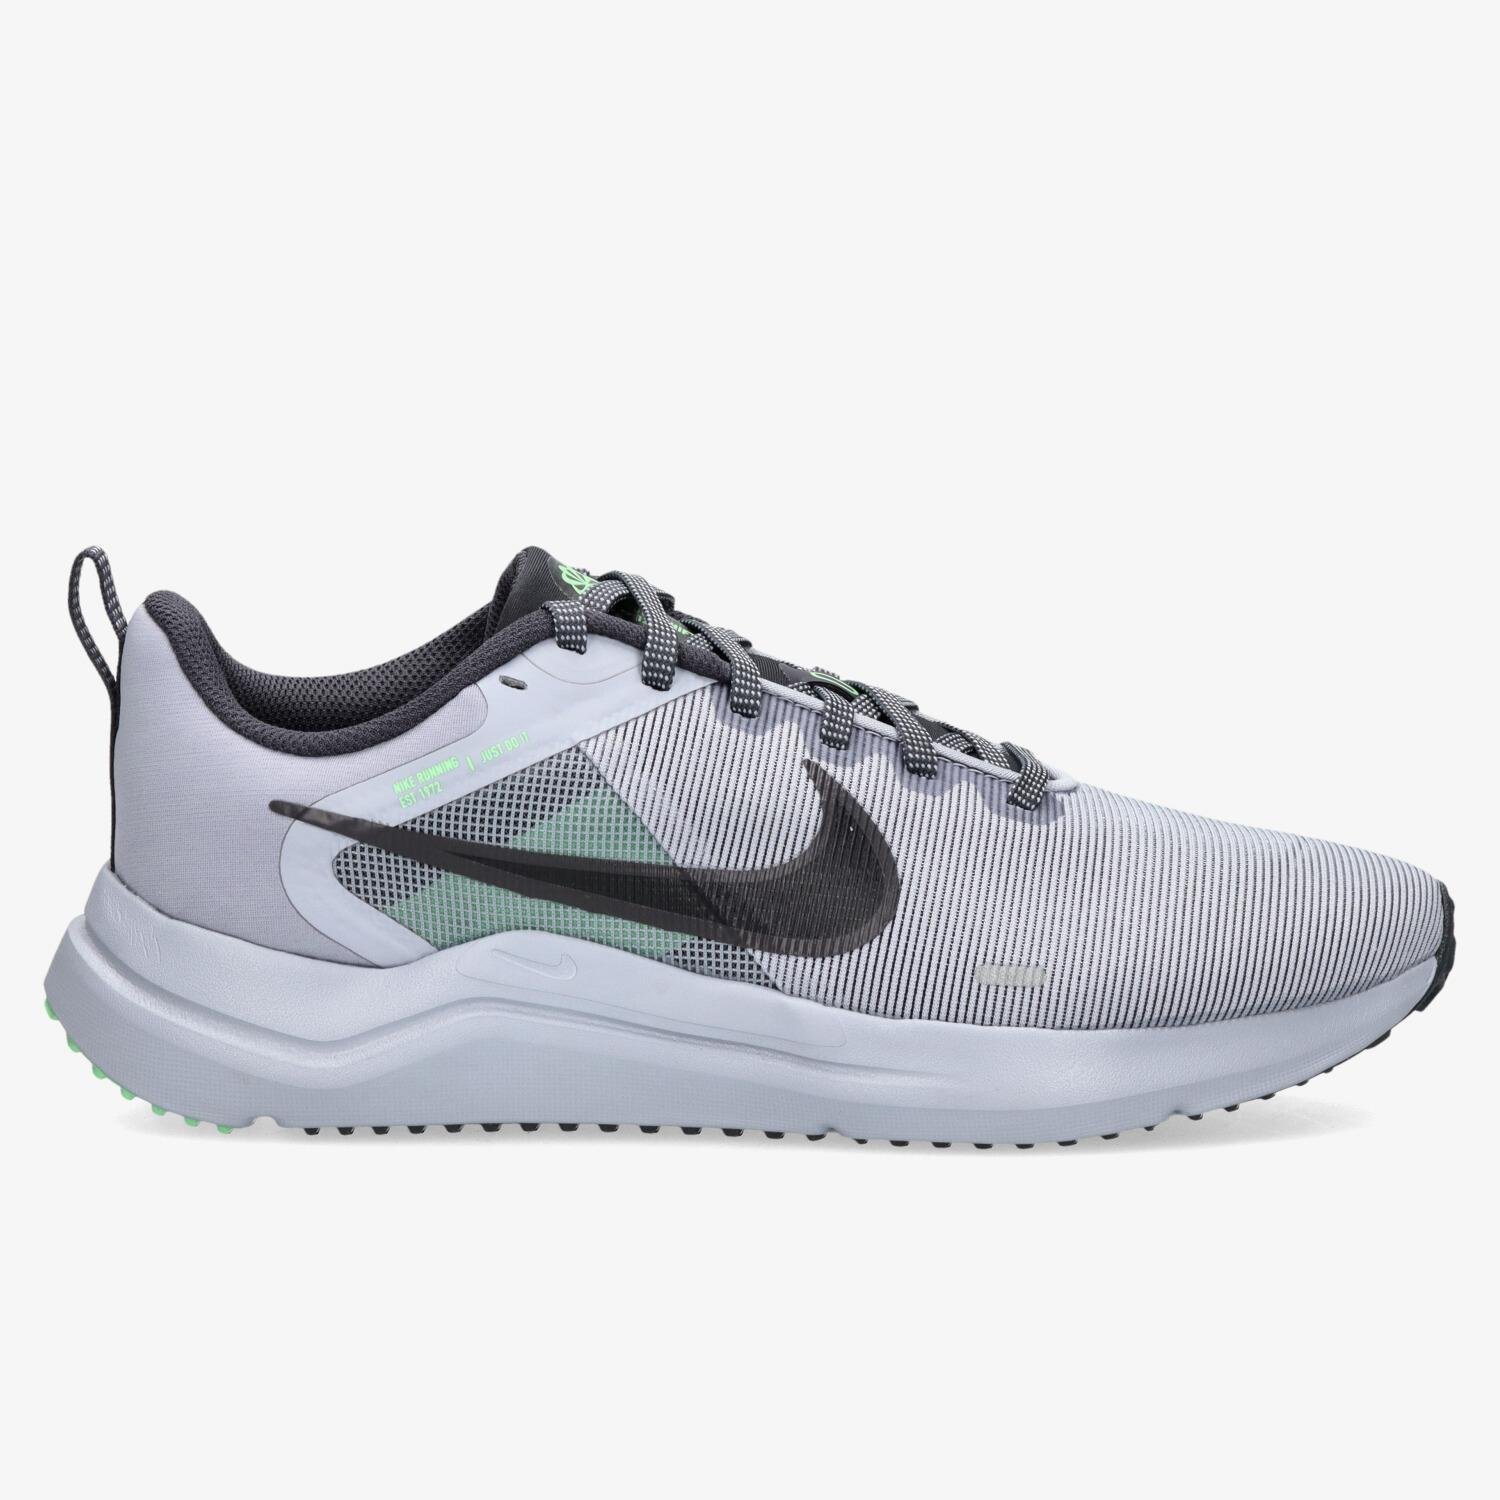 Nike - Gris - Running Hombre |